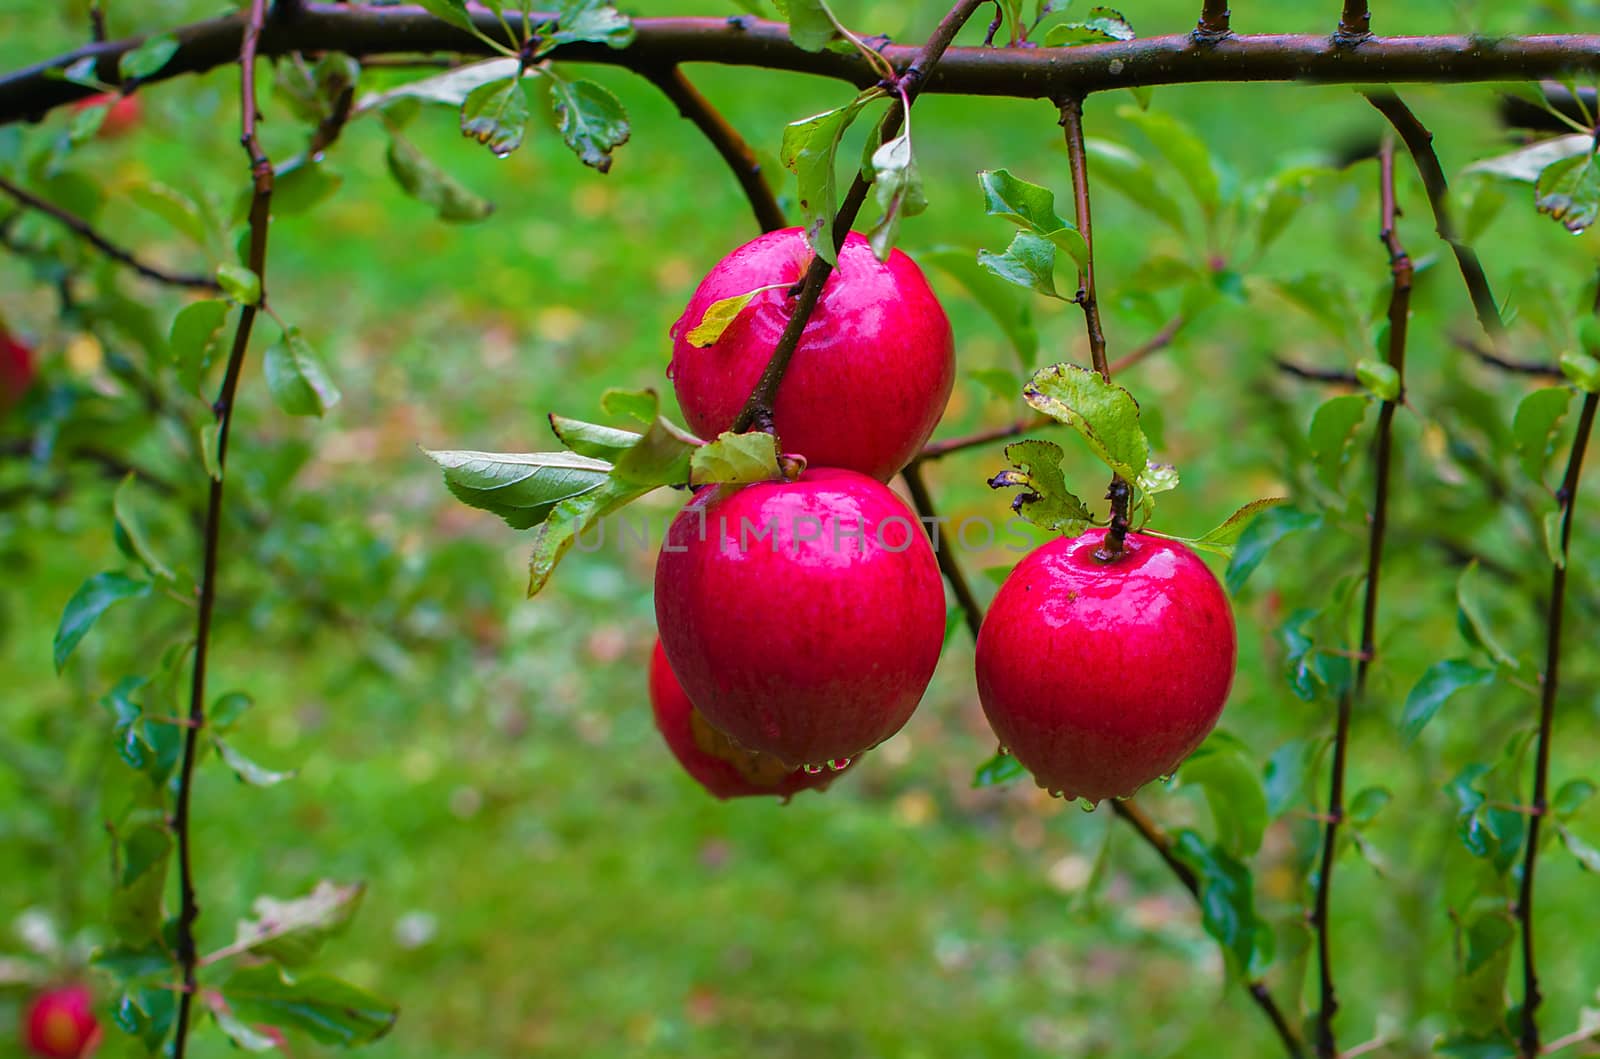 Red apple on a branch in droplets of rain. Shiny delicious apples hanging from a tree branch in an apple orchard branch